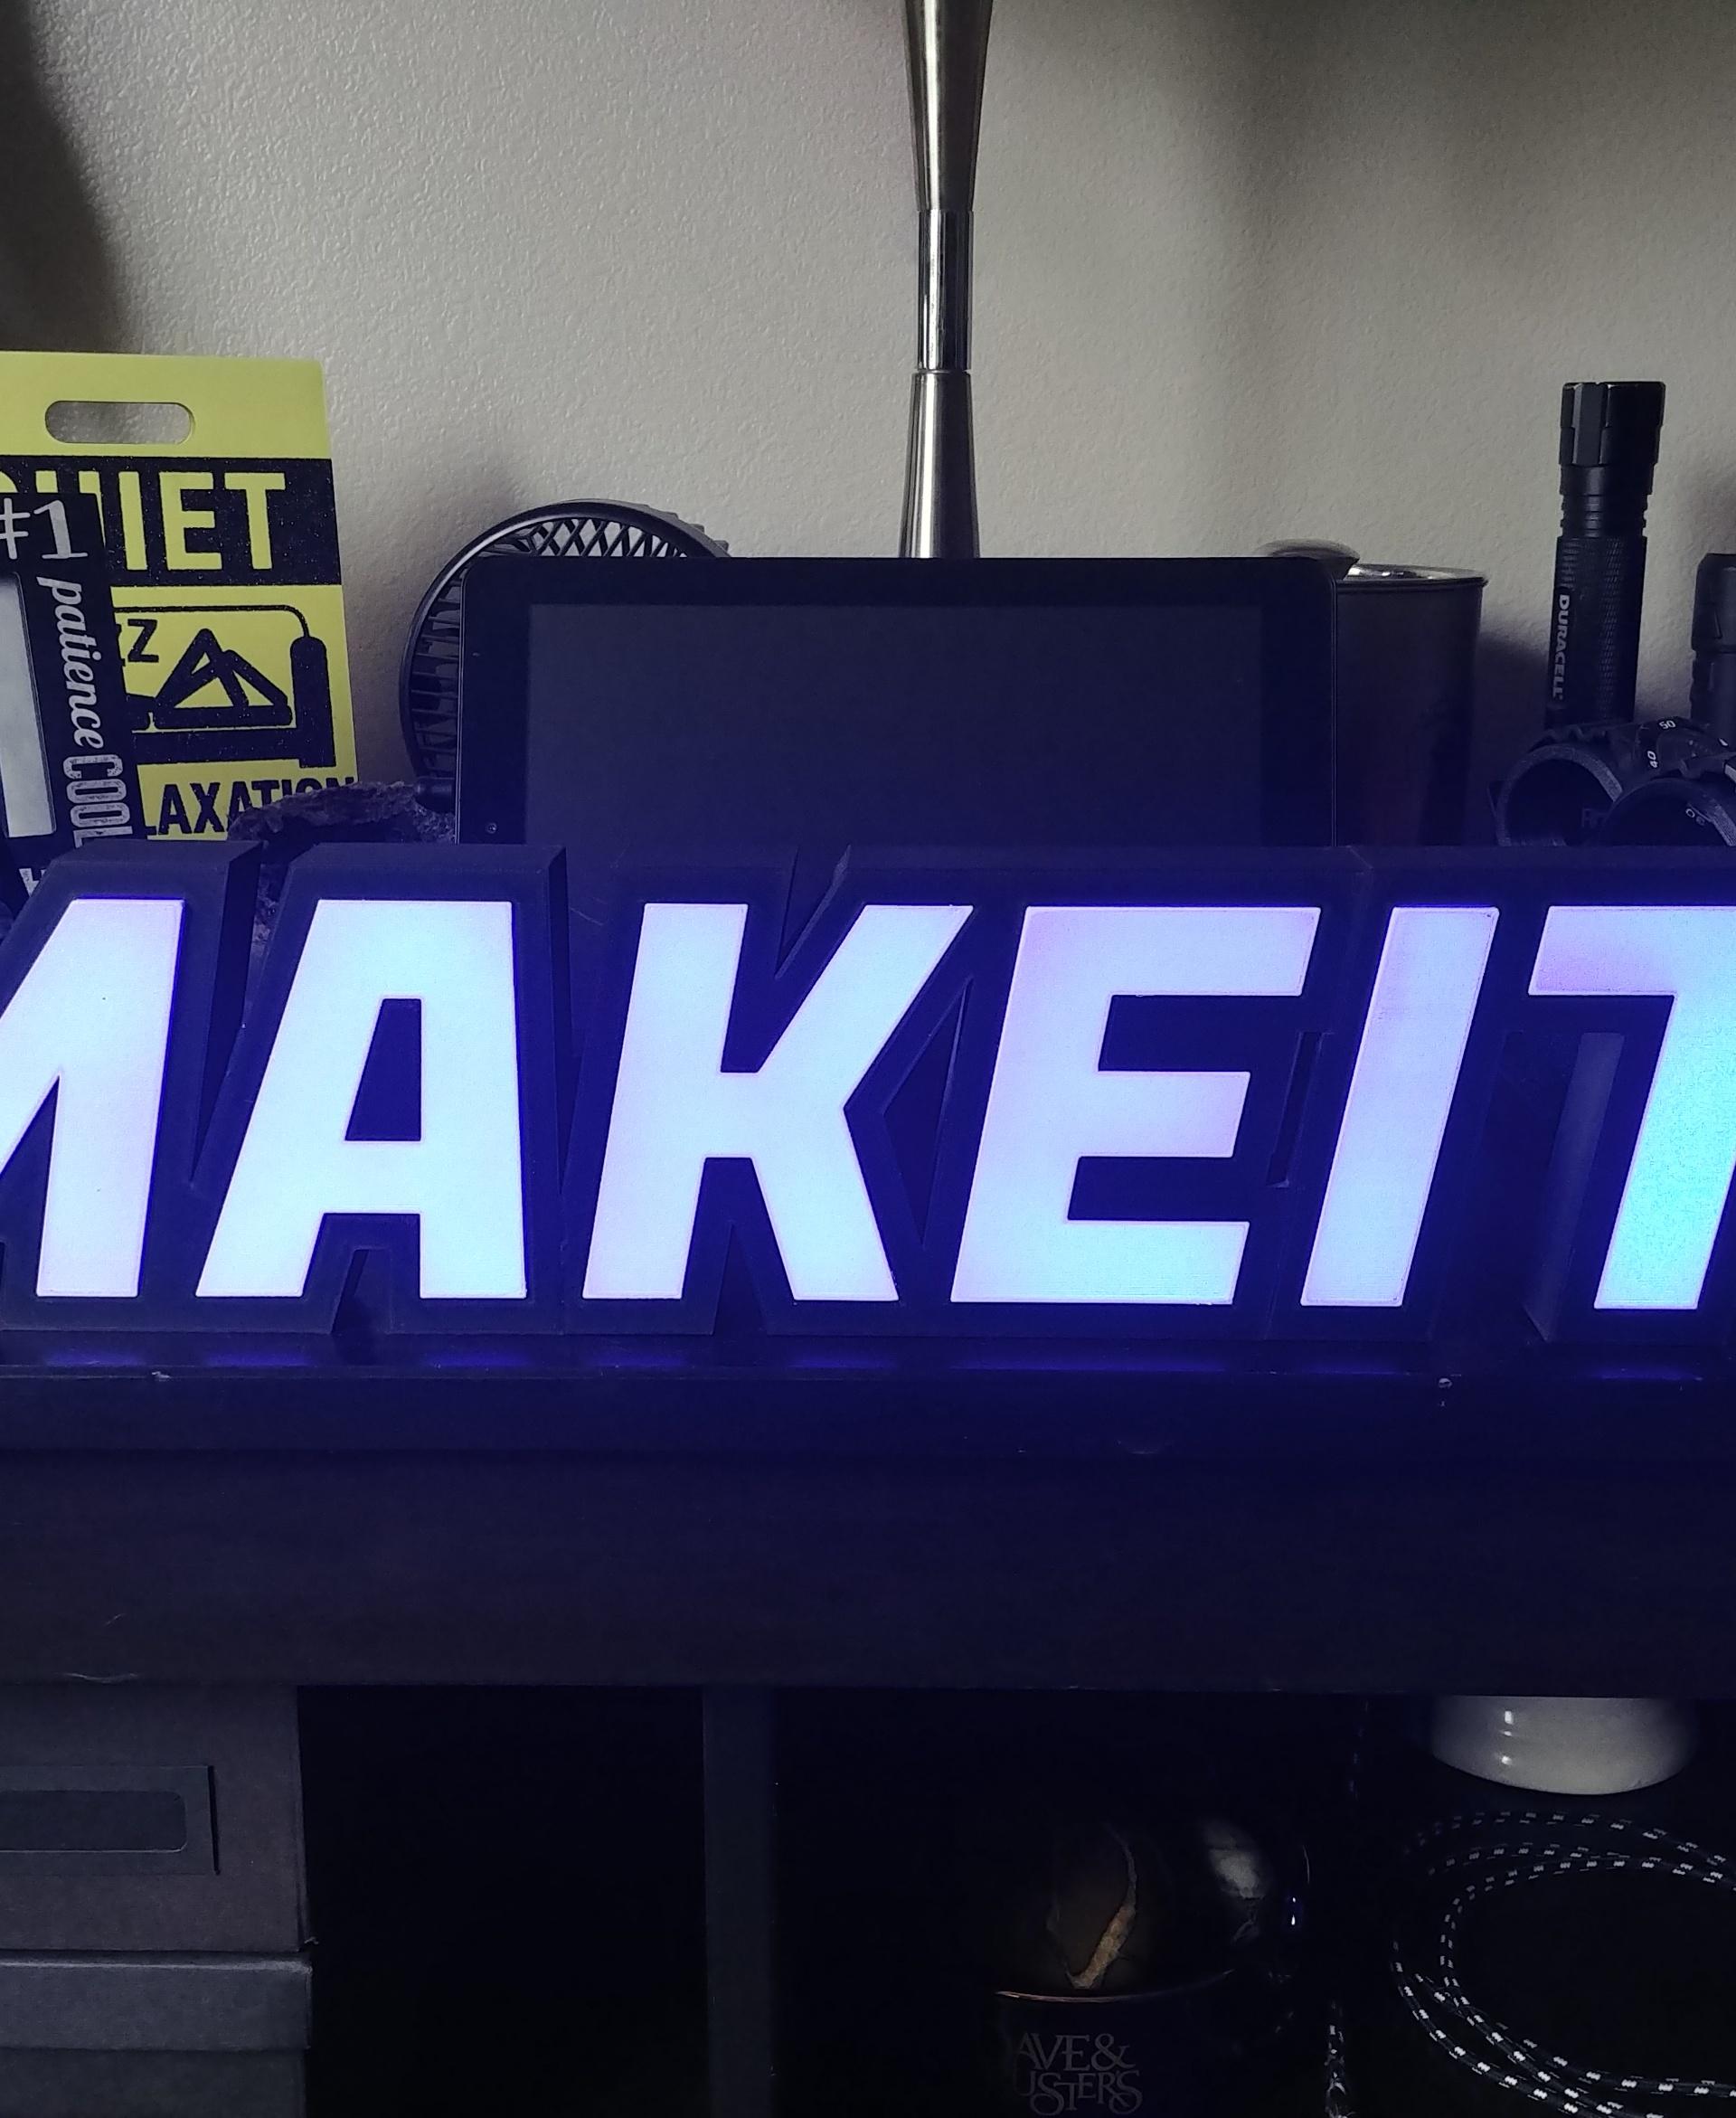 KEEP MAKING! LED SIGN - Here's my take on the sign; it's sure to inspire me to tackle even more projects! - 3d model